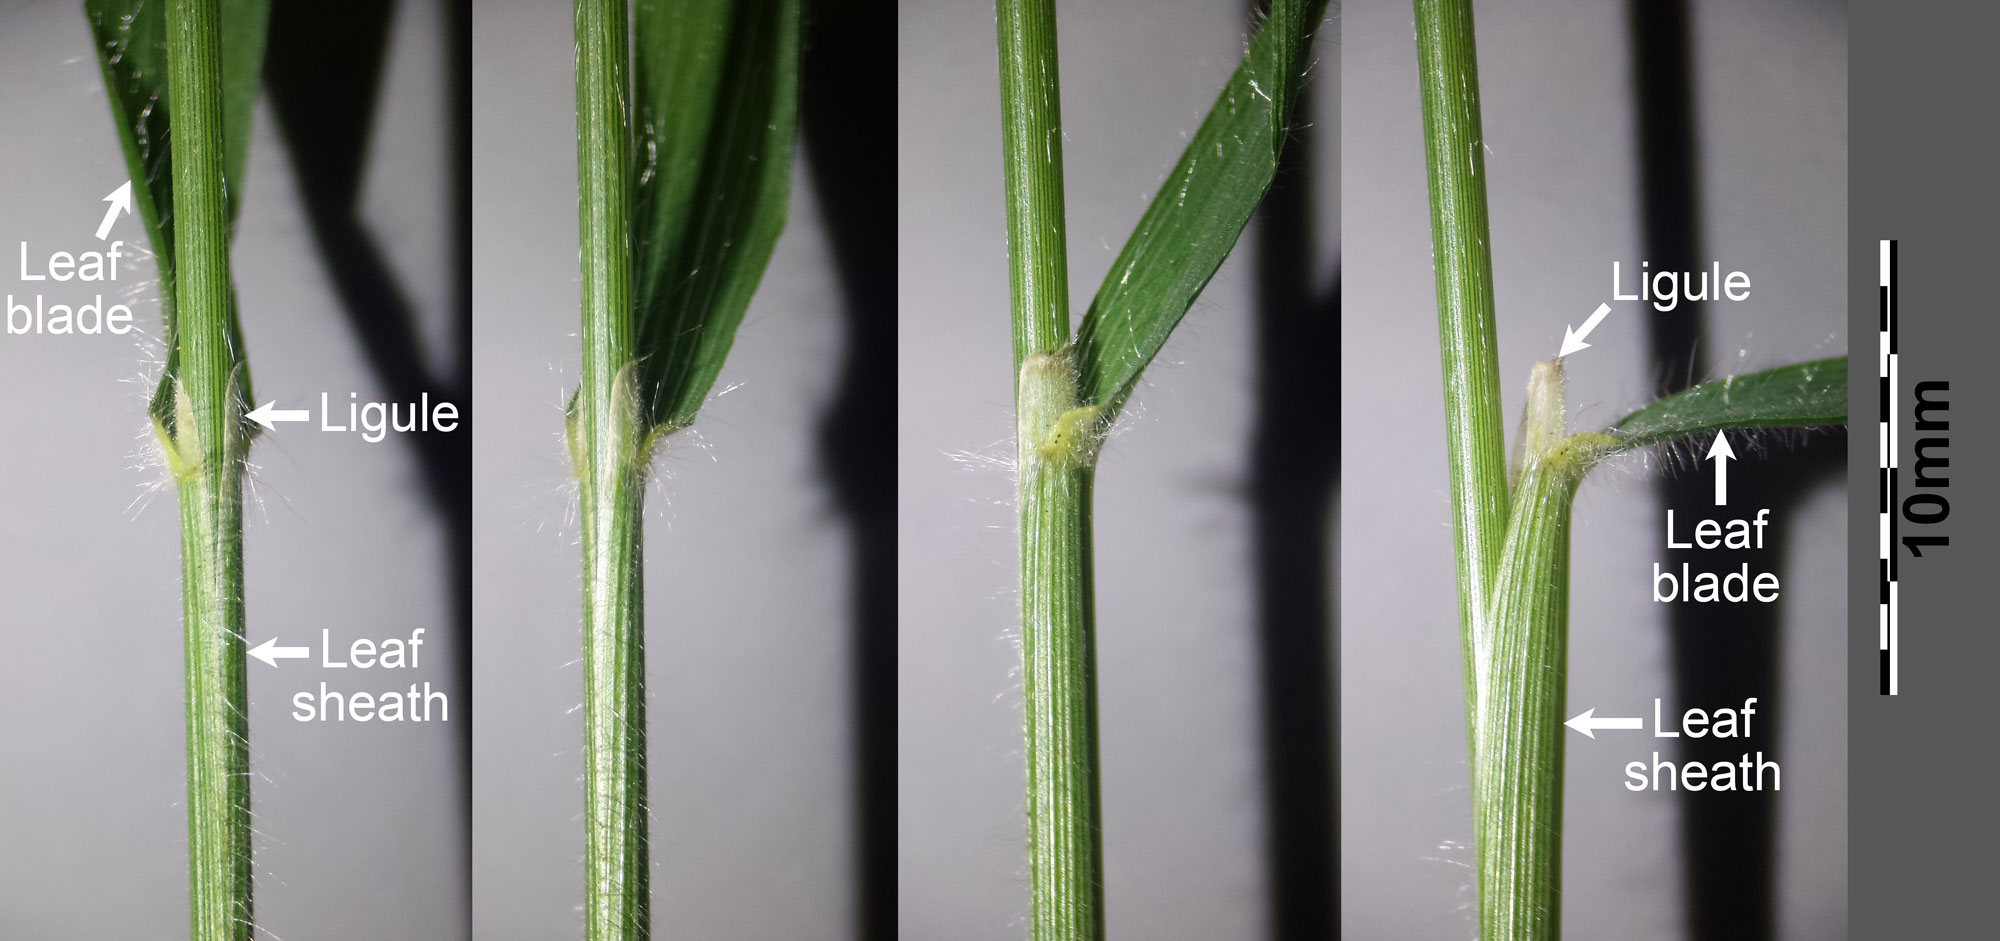 Photographs of a portion of a stem and leaf of false brome showing four views, all from the side; the part of the leaf where the sheath and blade meet is shown. The far leaf and far right images are labeled to indicate the leaf blade, leaf sheath, and ligule.